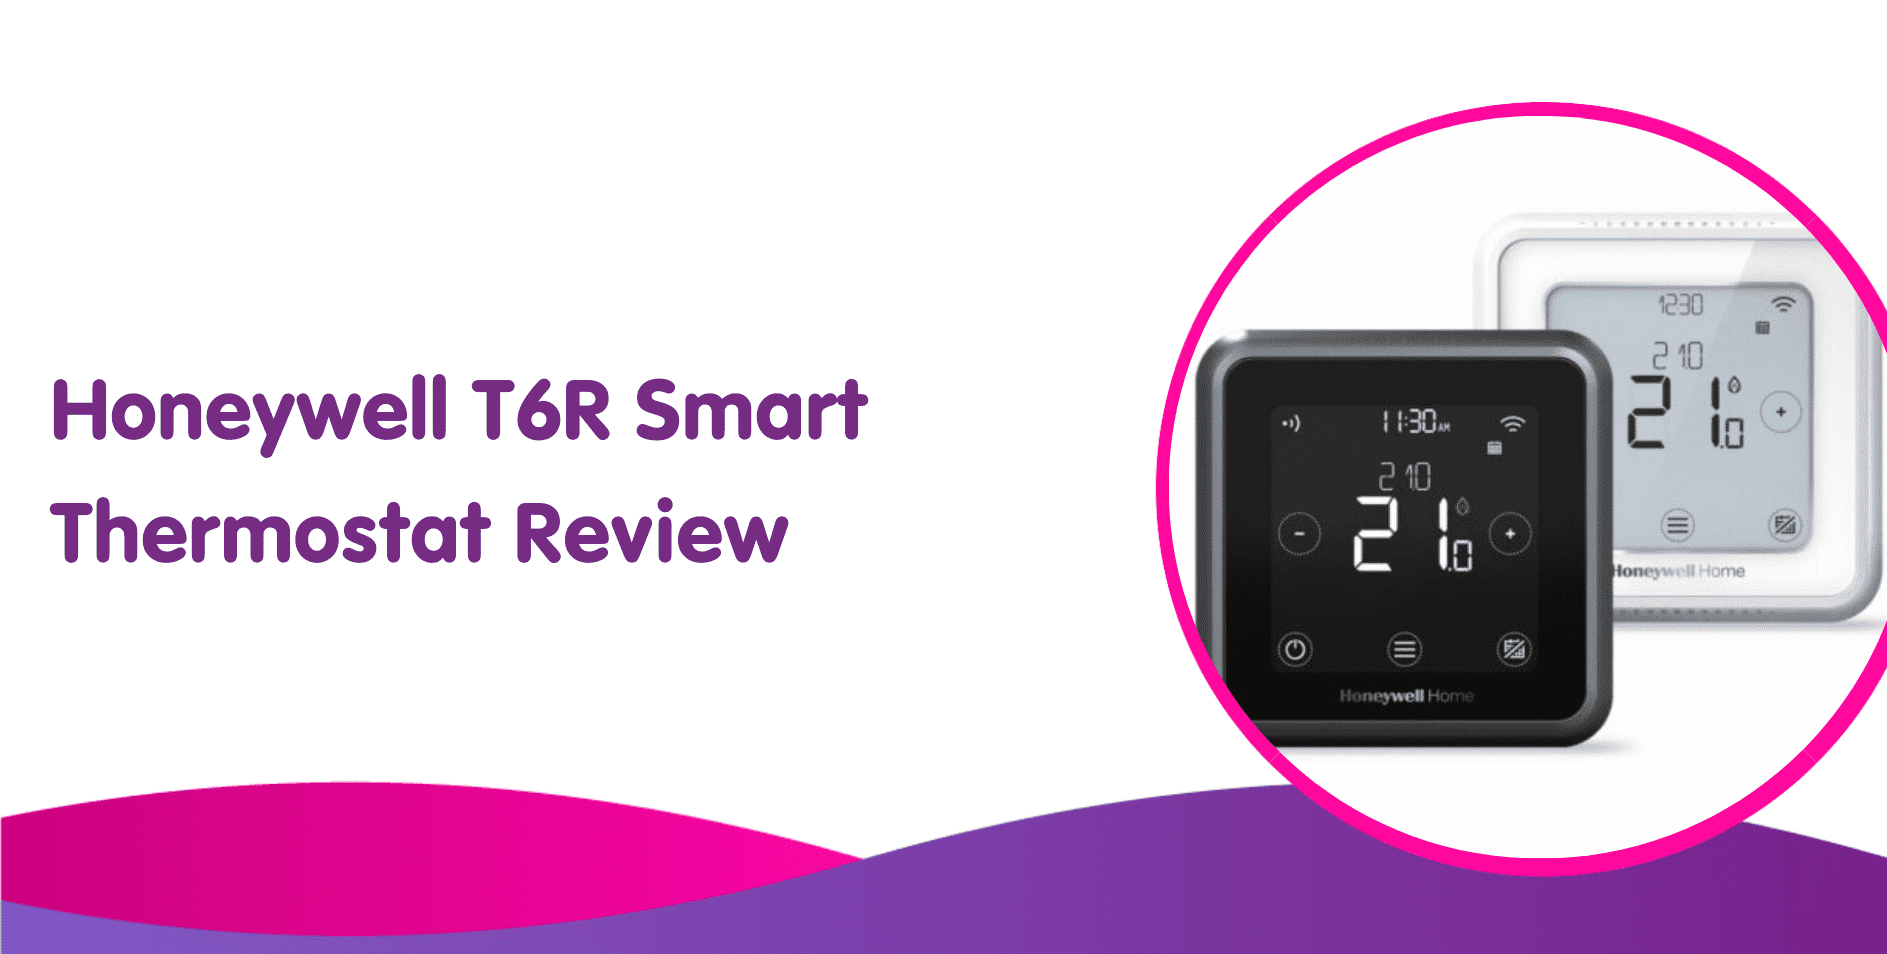 Honeywell T6R Smart Thermostat Review